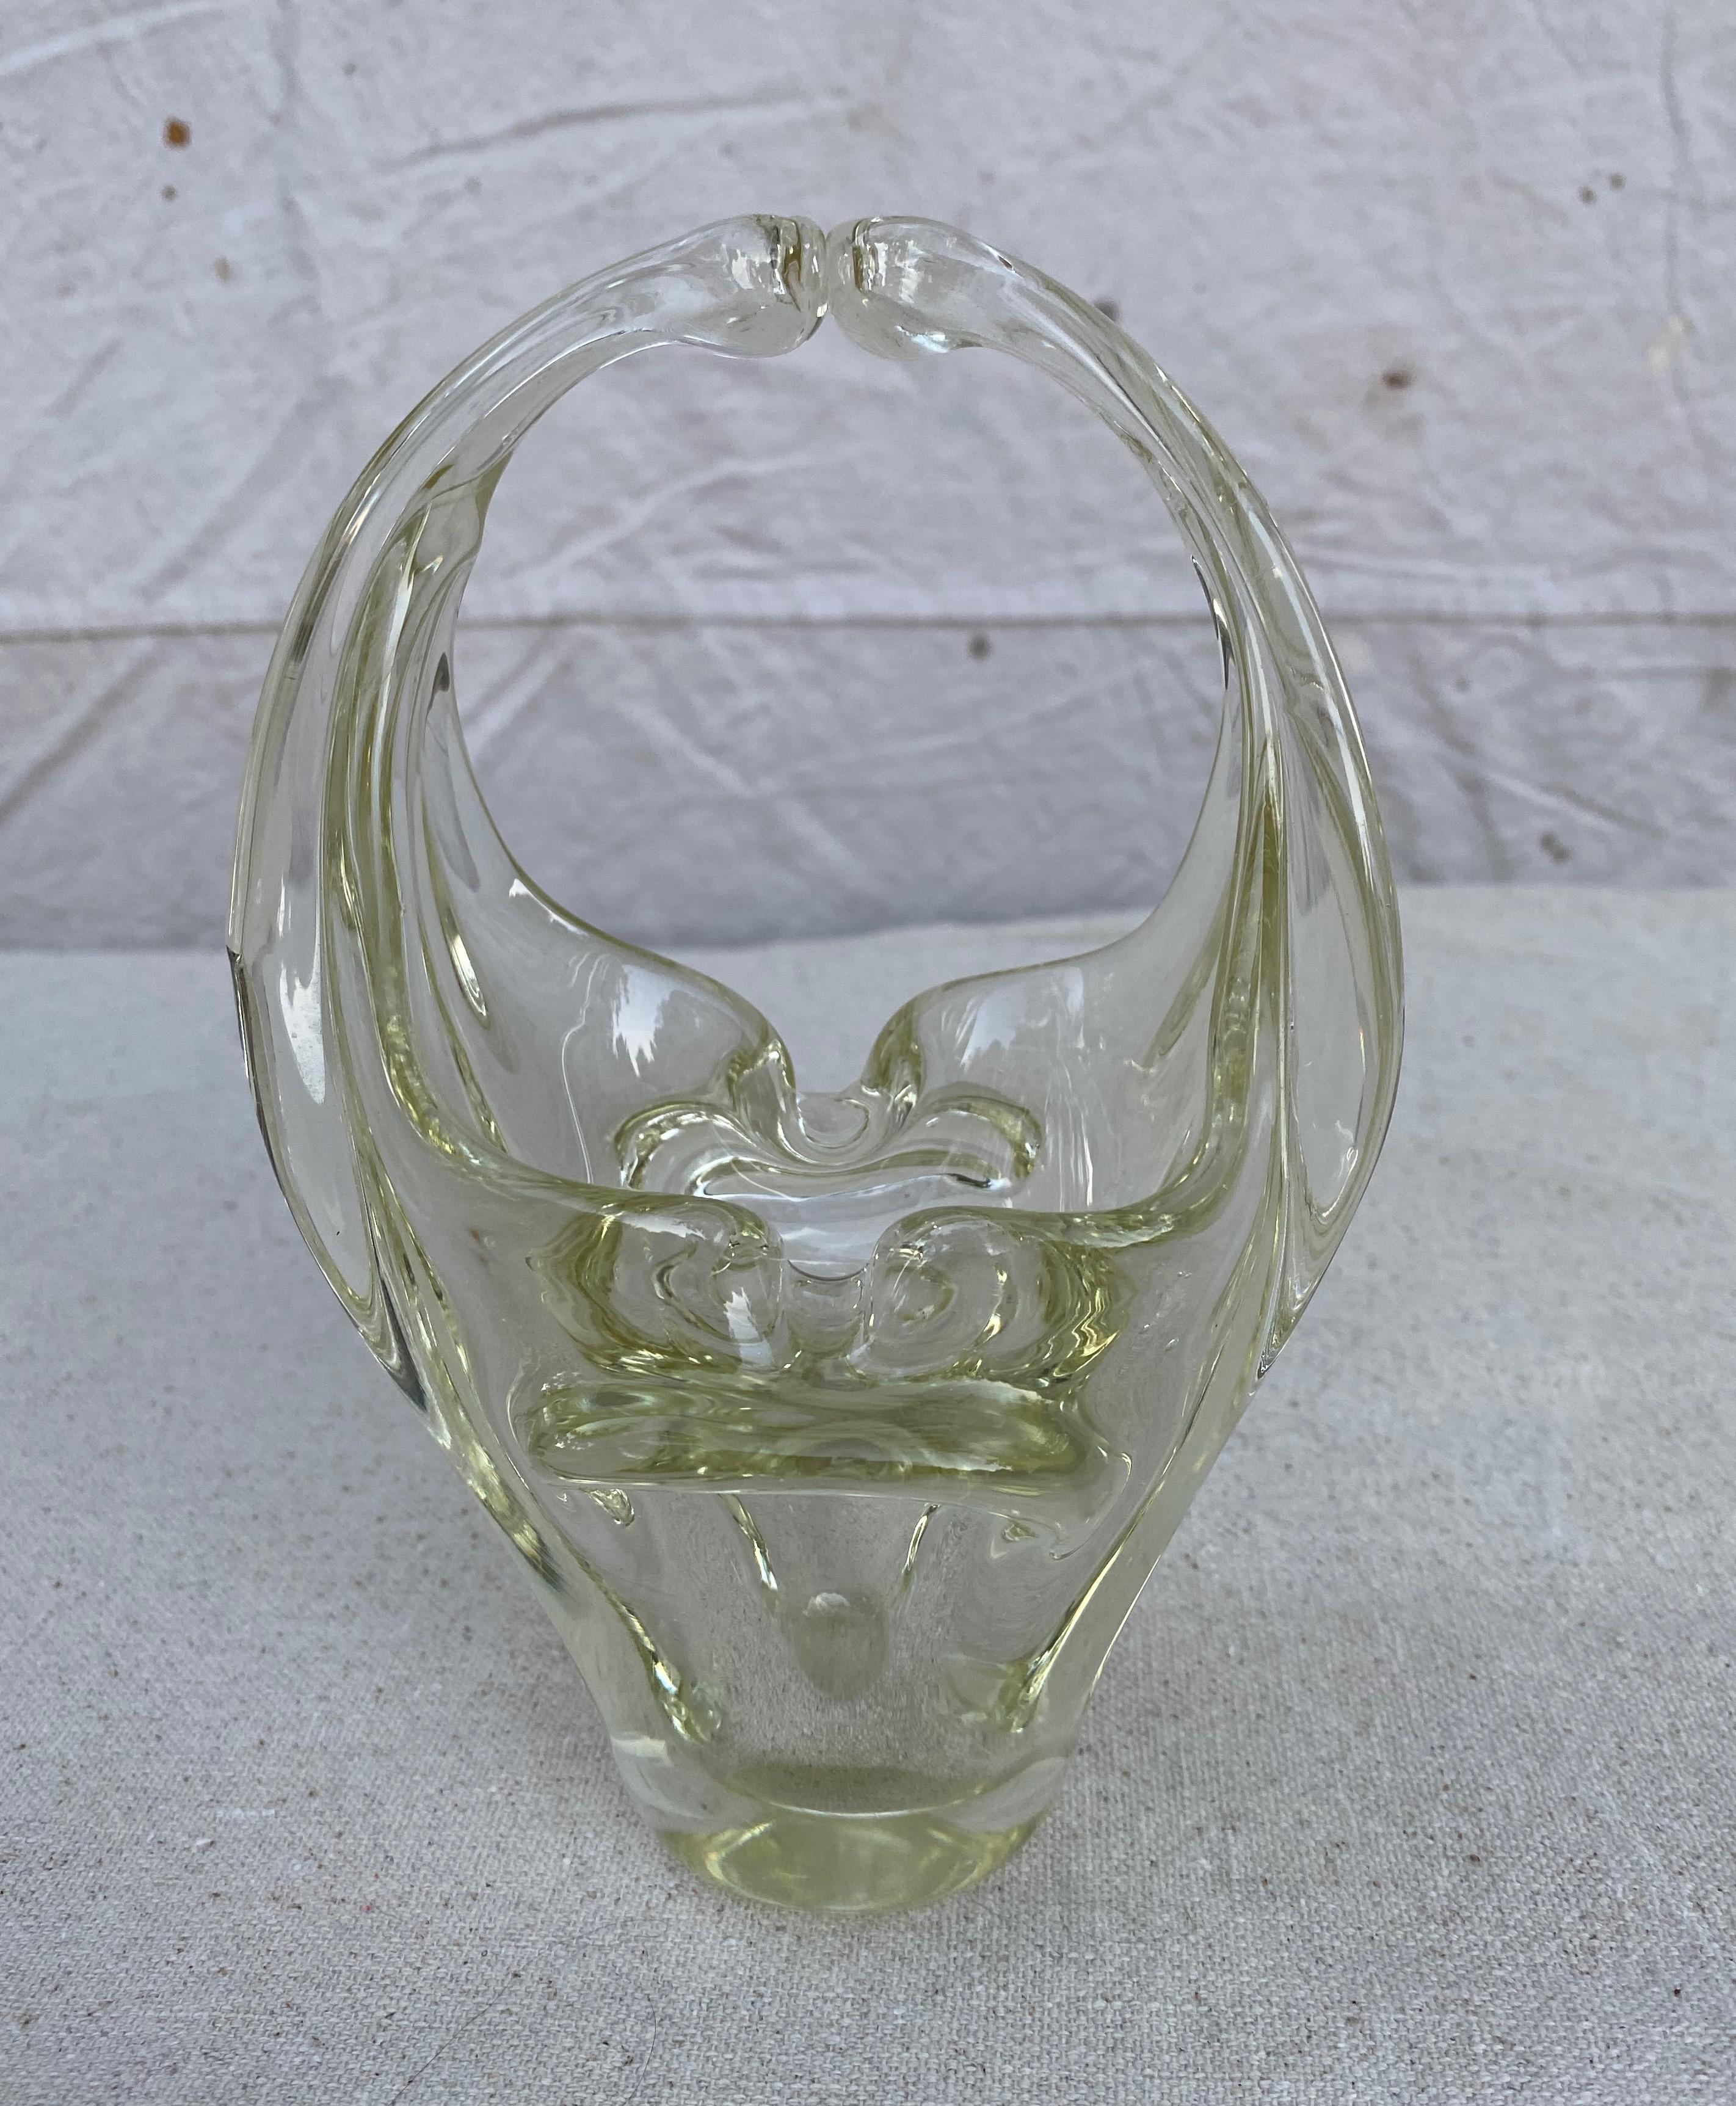 A stunning French hand blown Art De Vannes decorative bowl, lightly tinted green that gives a interesting depth to the piece. The base is formed in sculptural shapes that rise up into a double winged shape. French 1960s.

Stamped on the bottom